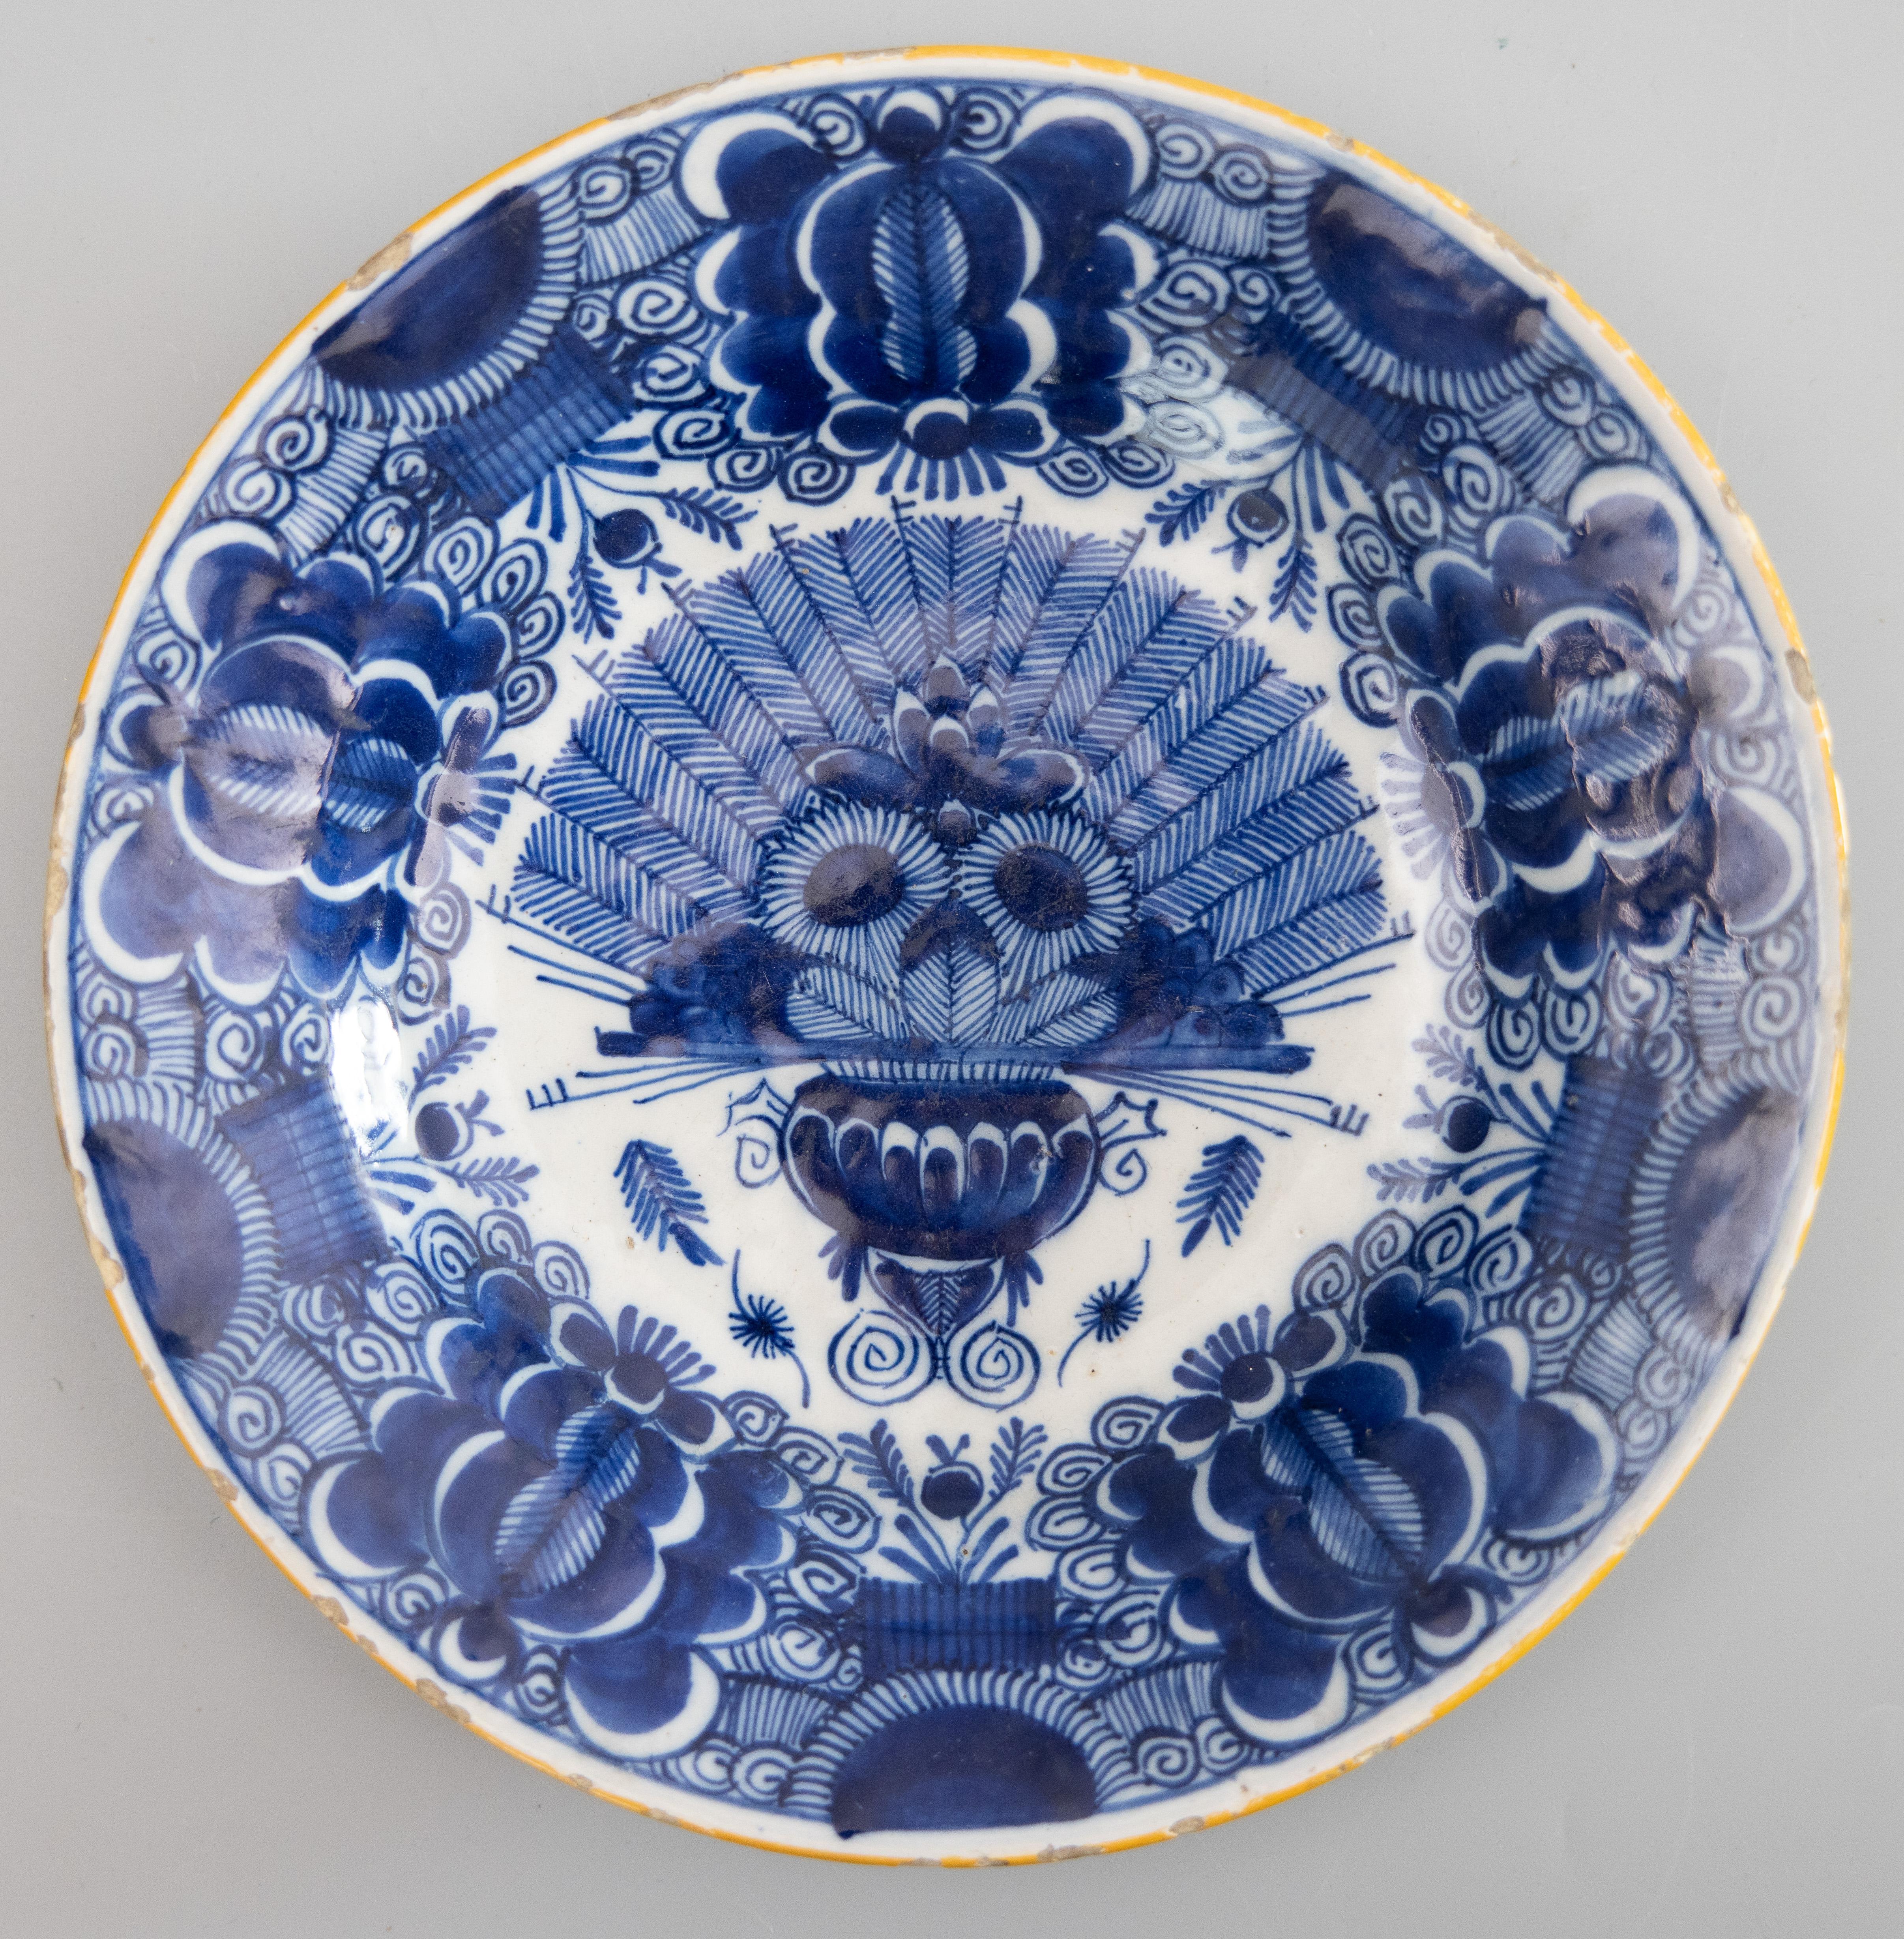 A superb antique pair of 18th-Century Dutch Delft faience plates with the 'Peacock' pattern by the De Klaauw (The Claw) Delftware factory. Maker's mark on reverse. These lovely plates have a hand painted peacock design in cobalt blue and white with